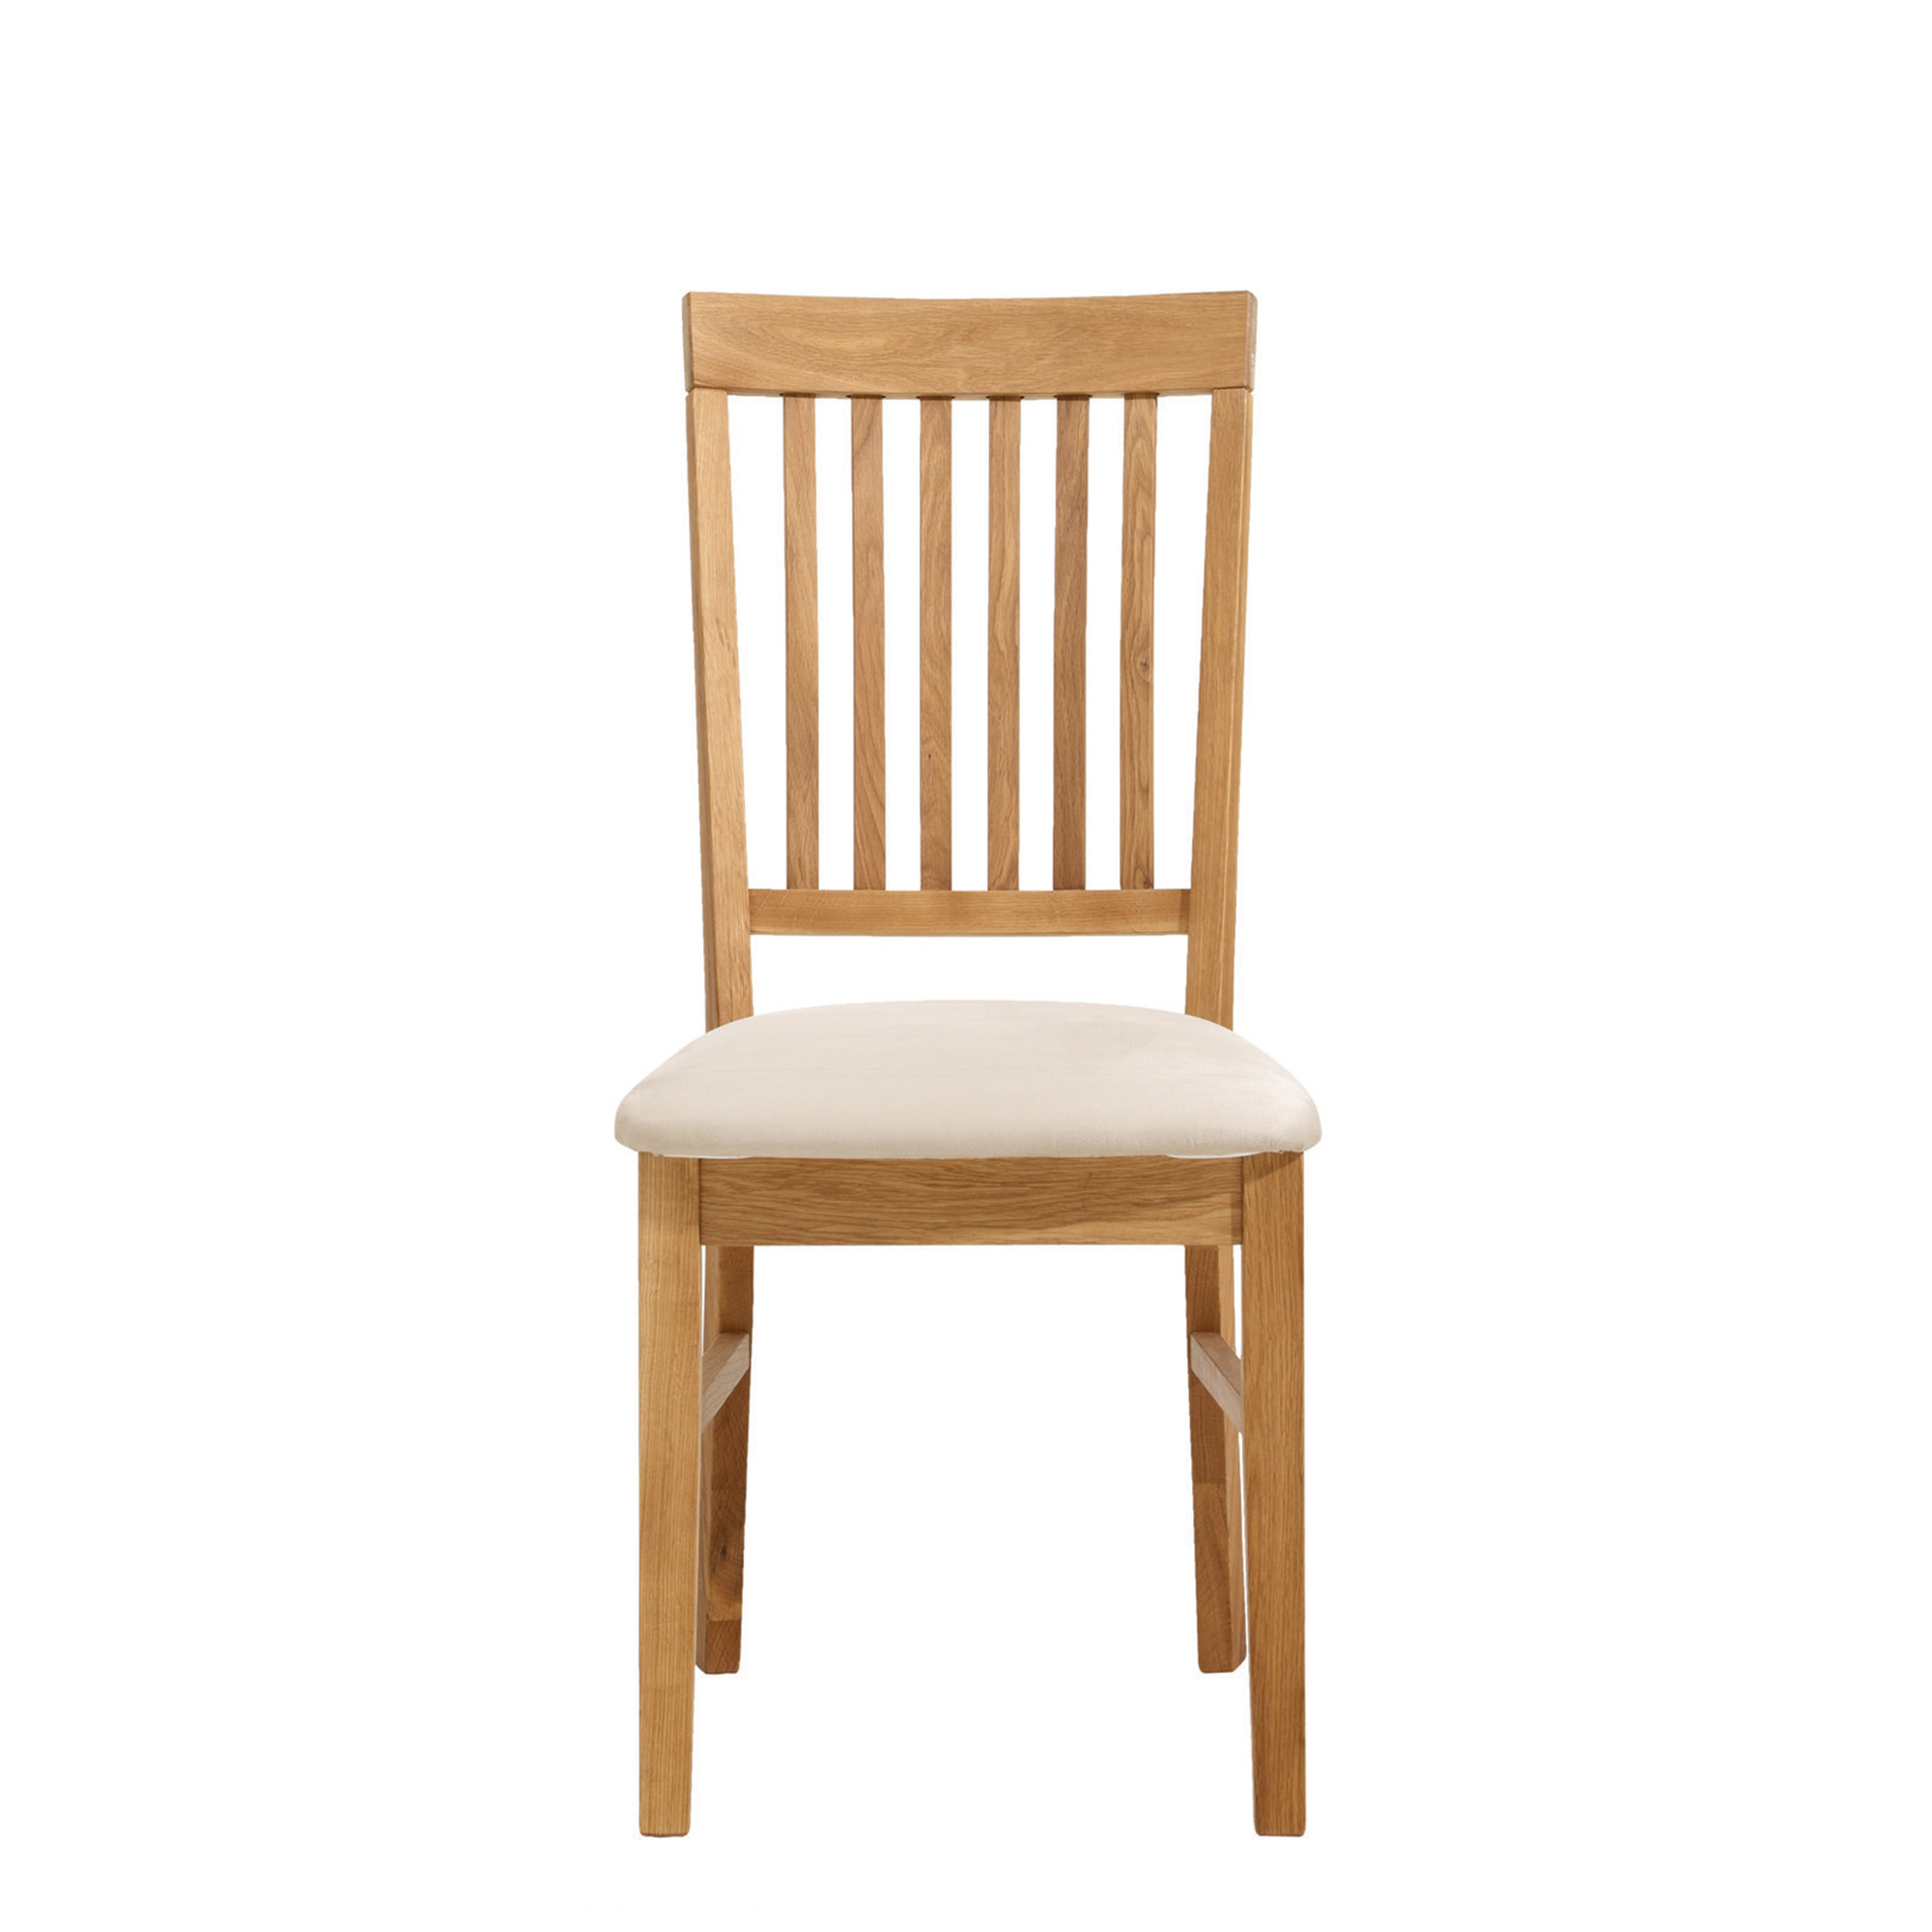 Royal Oak Upholstered Dining Chairs, Folding Wooden Dining Chairs Padded Uk